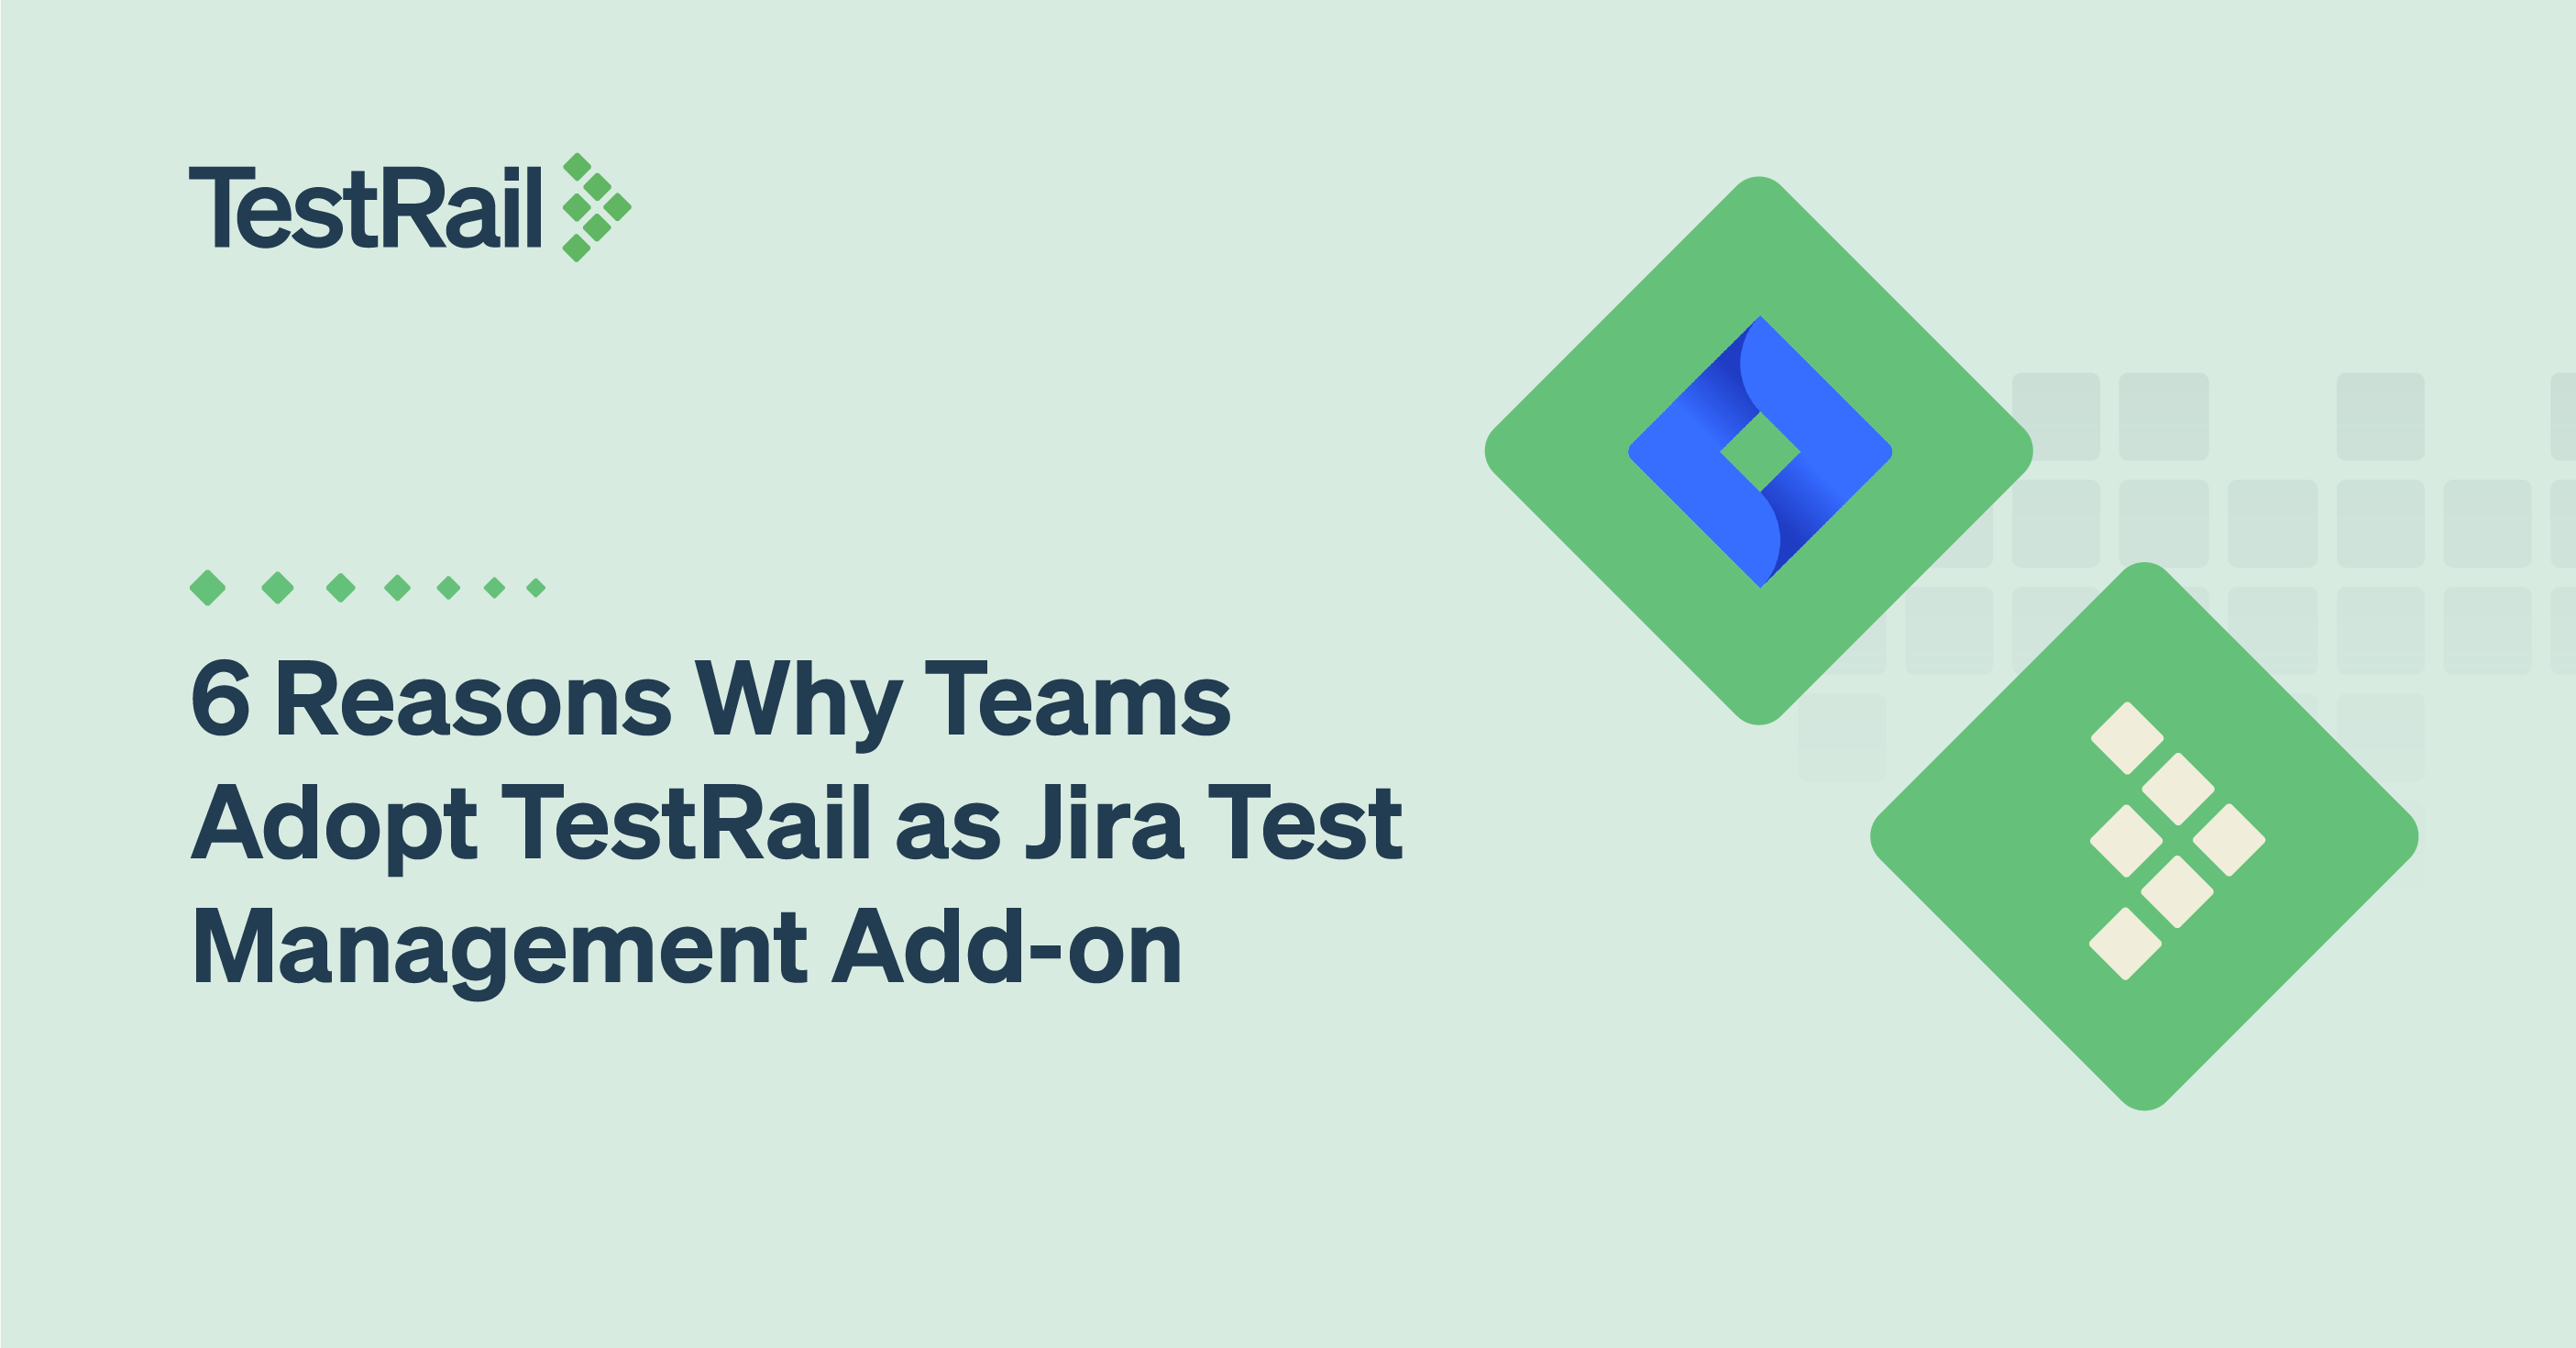 6 Reasons Why Teams Adopt TestRail as JIRA Test Management Add-on